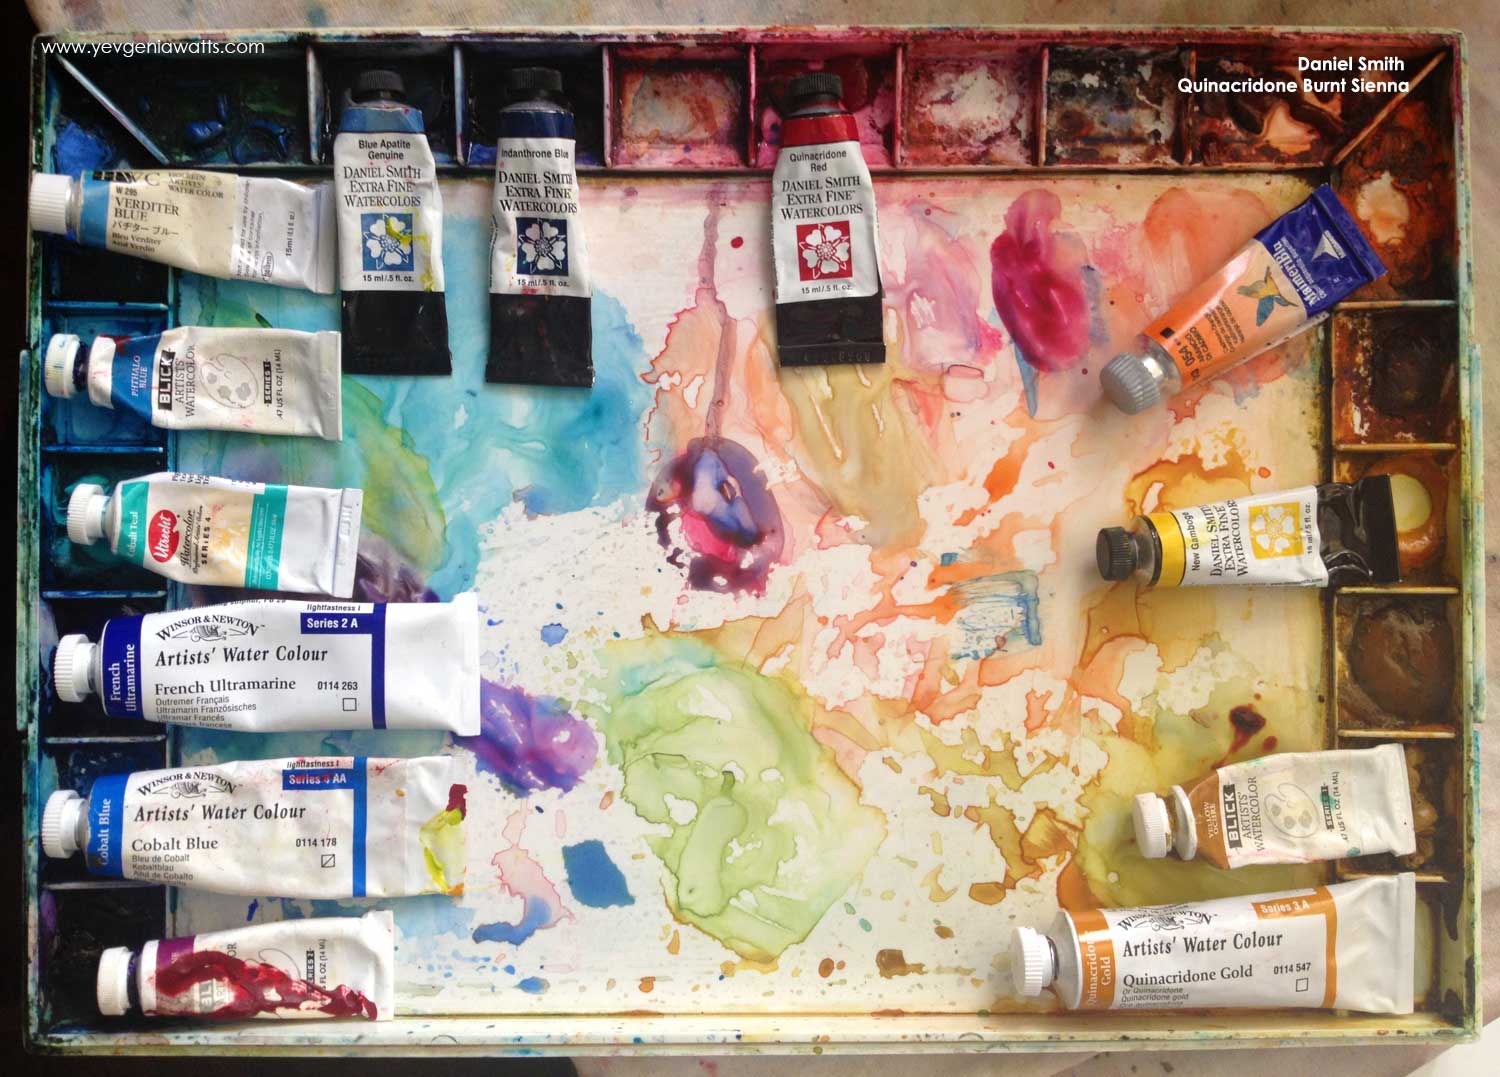 Do you let your watercolor paint dry on the palette? — Yevgenia Watts